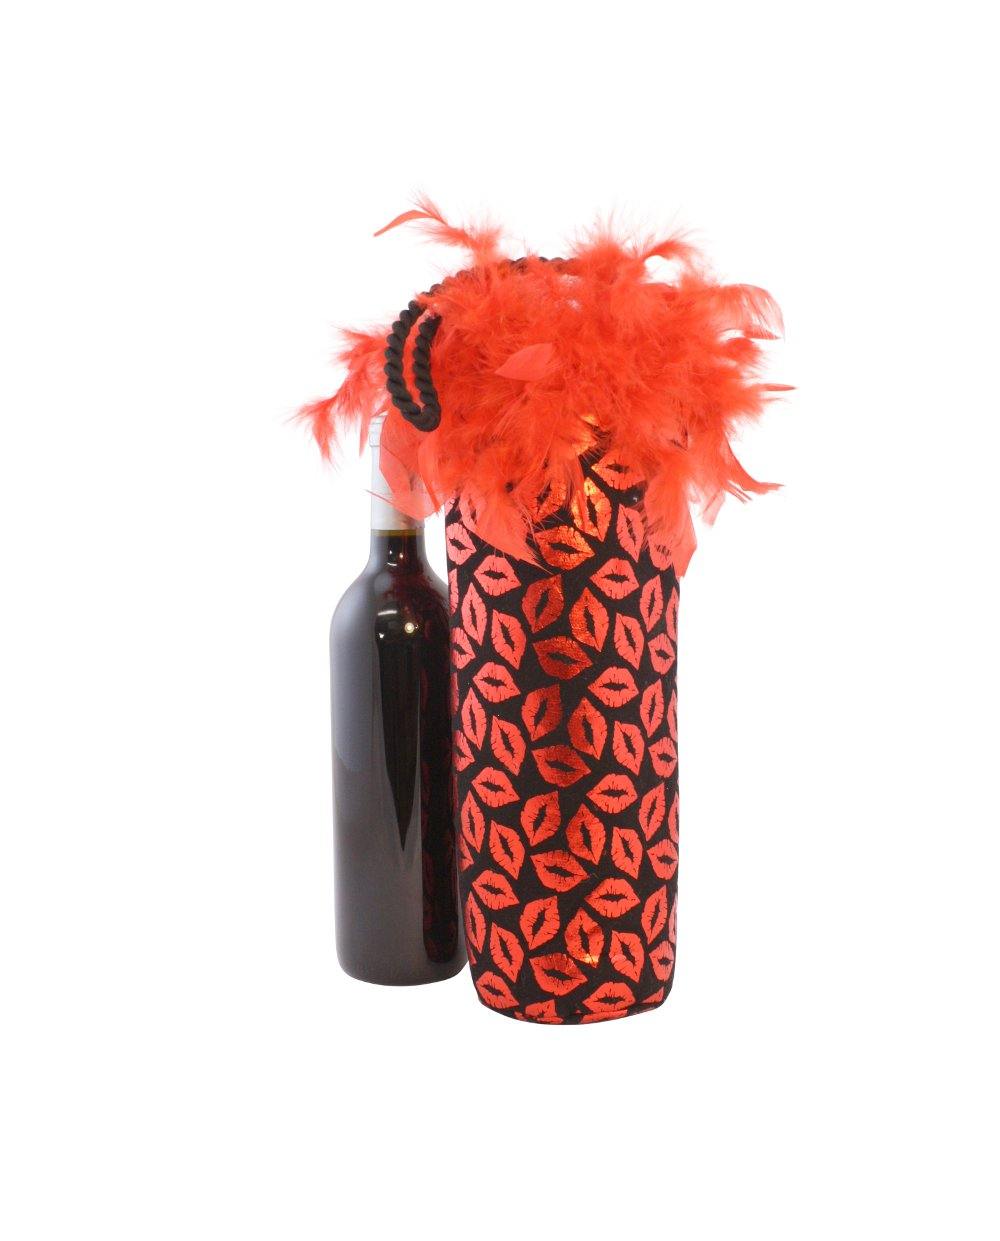 Diva Wine Bag with Red Metallic Lips and Feather Trim - Tipsy Totes | Wine Gifts | Beer Koozies | Wine Totes | Simply Fabulous